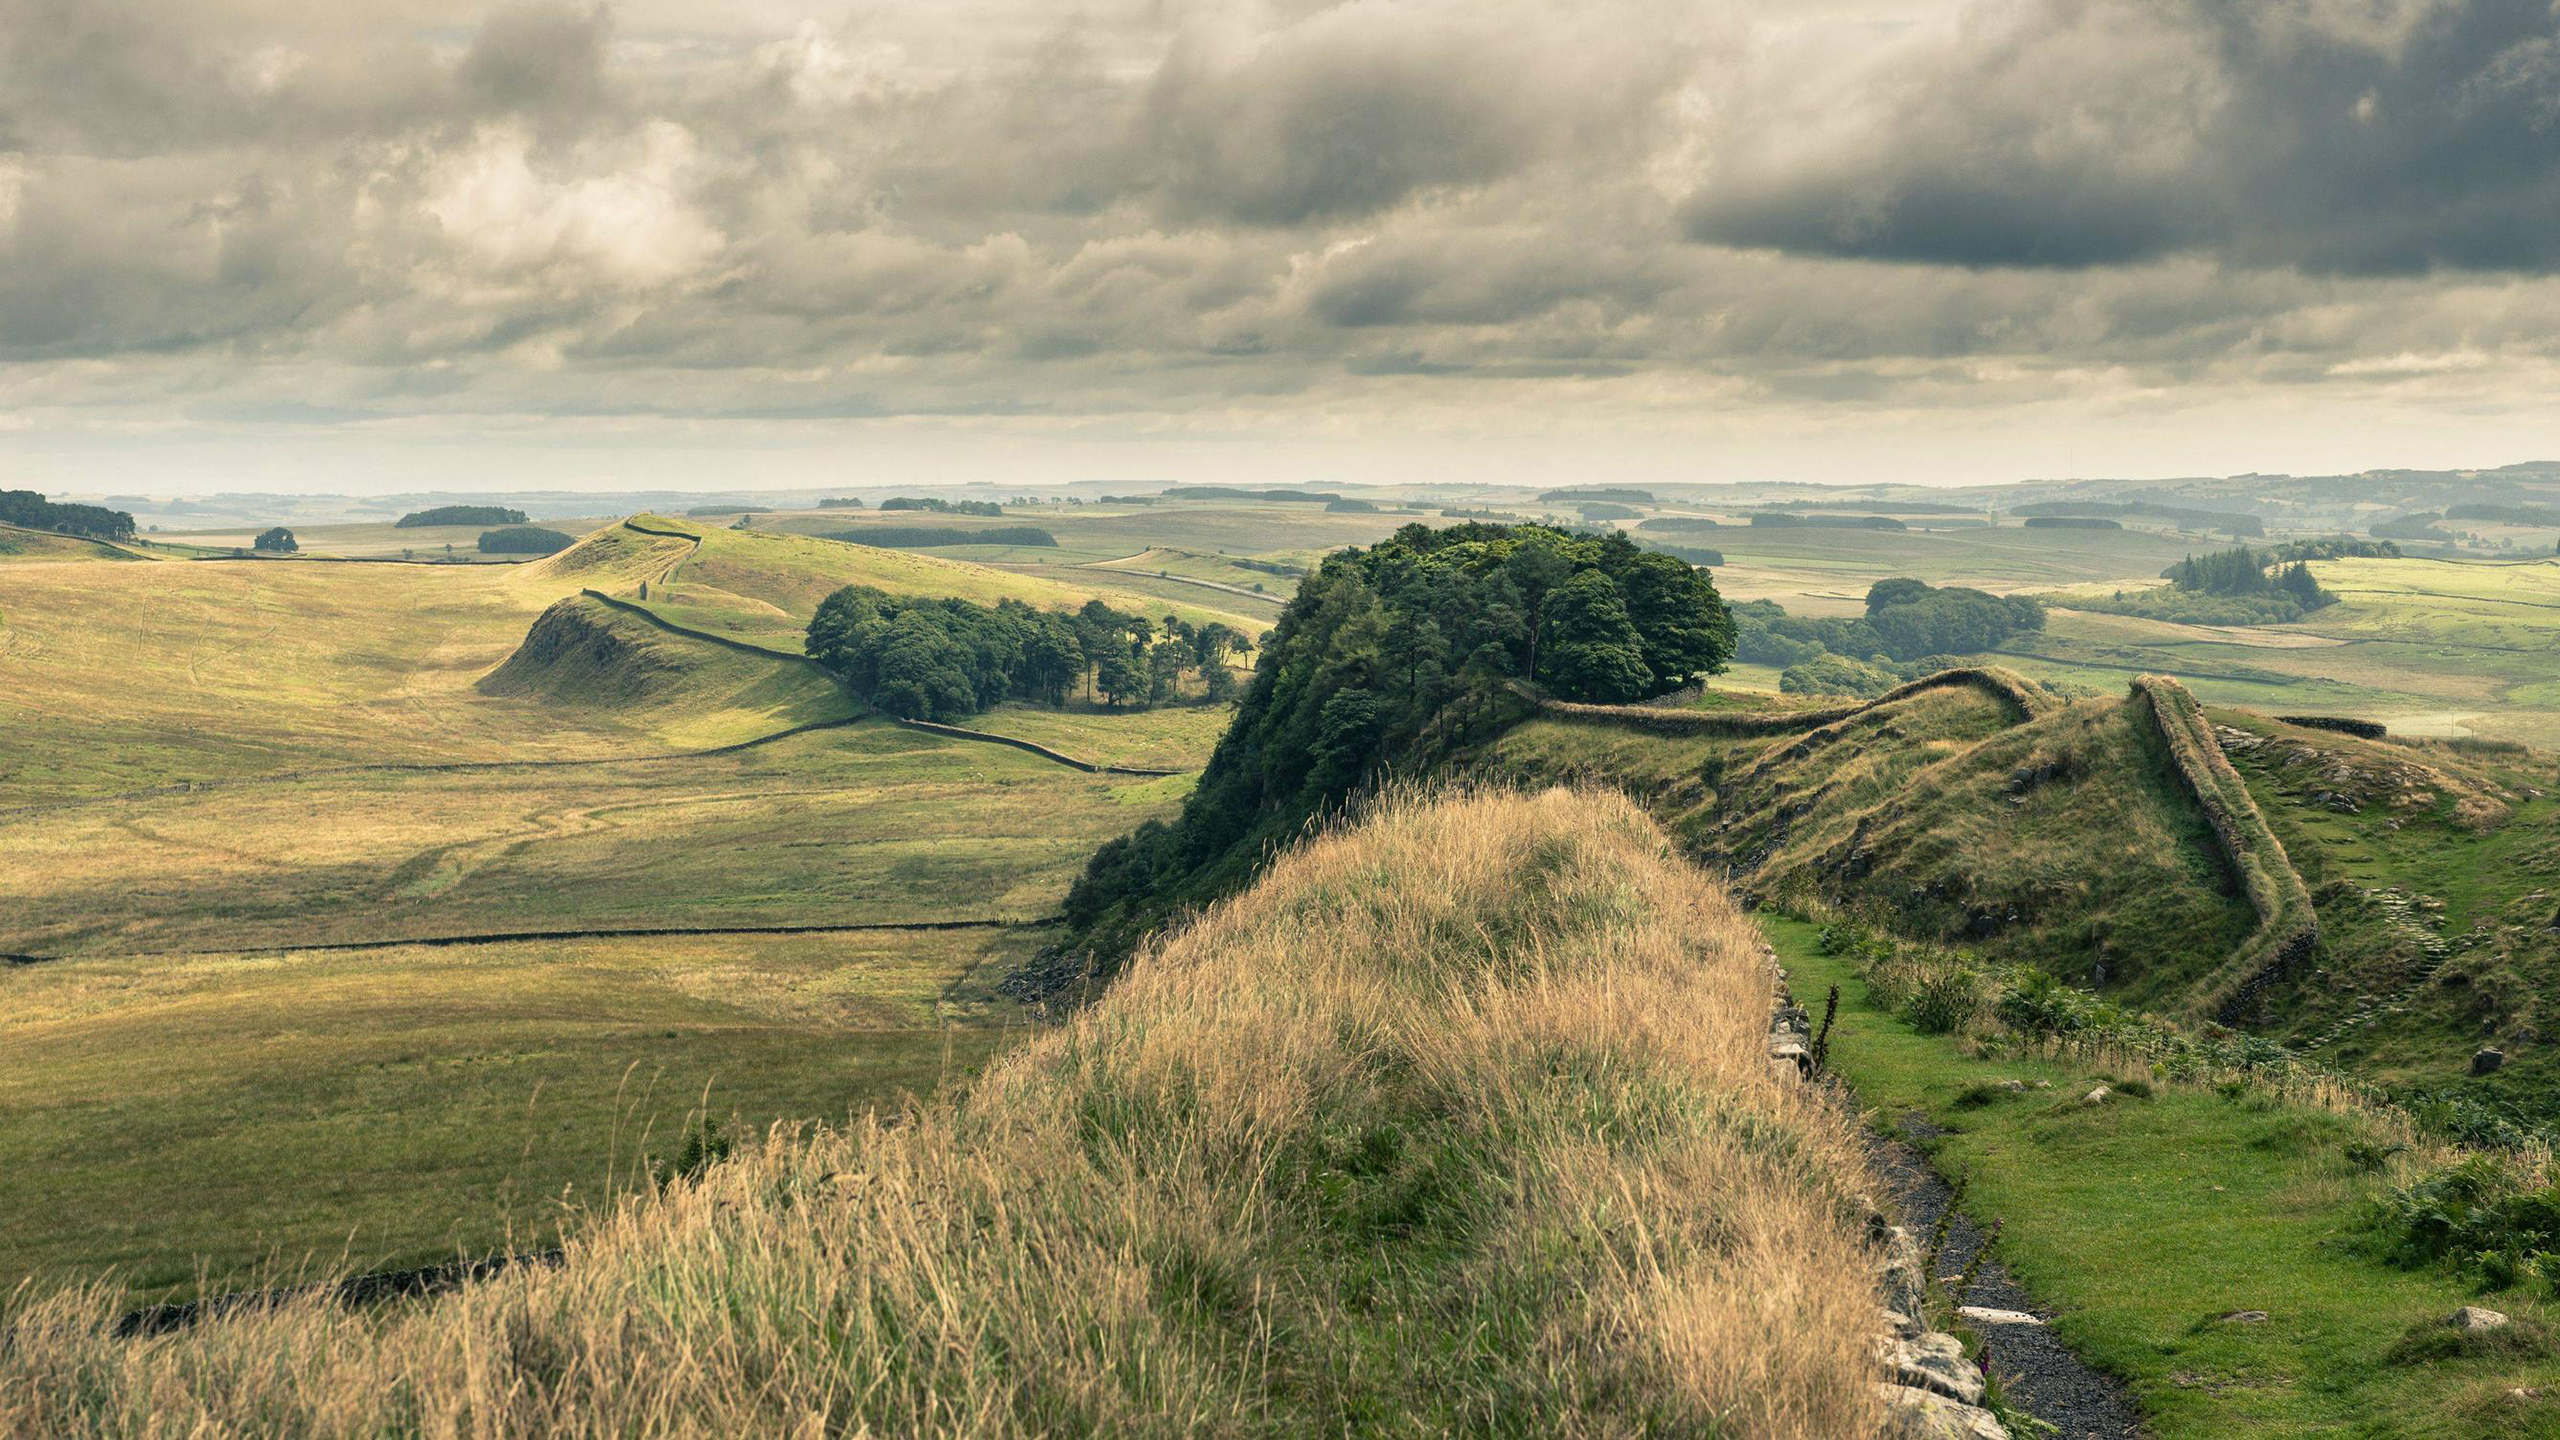 I Tried To Give Infos On What I Remember For Some Pictures - Hadrian's Wall , HD Wallpaper & Backgrounds